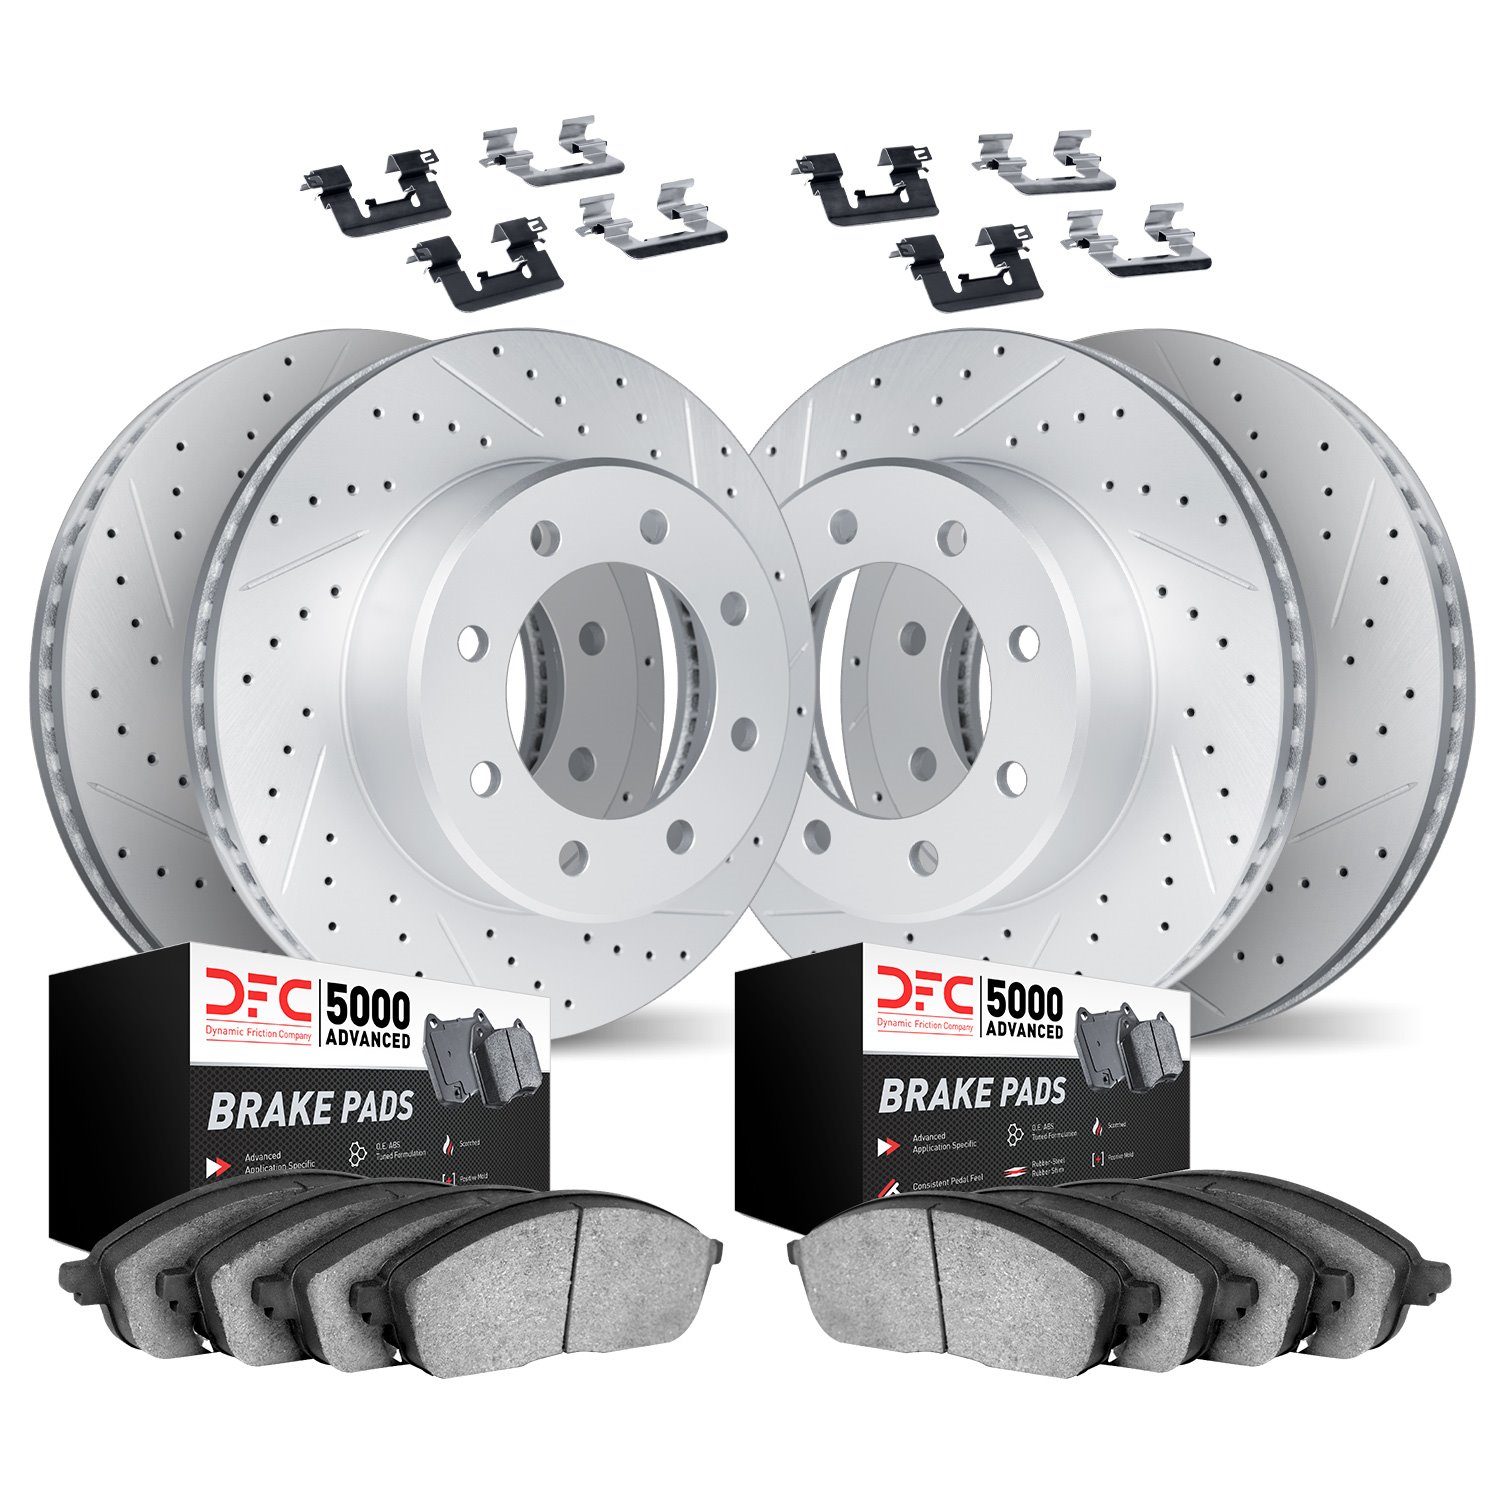 2514-48012 Geoperformance Drilled/Slotted Rotors w/5000 Advanced Brake Pads Kit & Hardware, 2003-2017 GM, Position: Front and Re